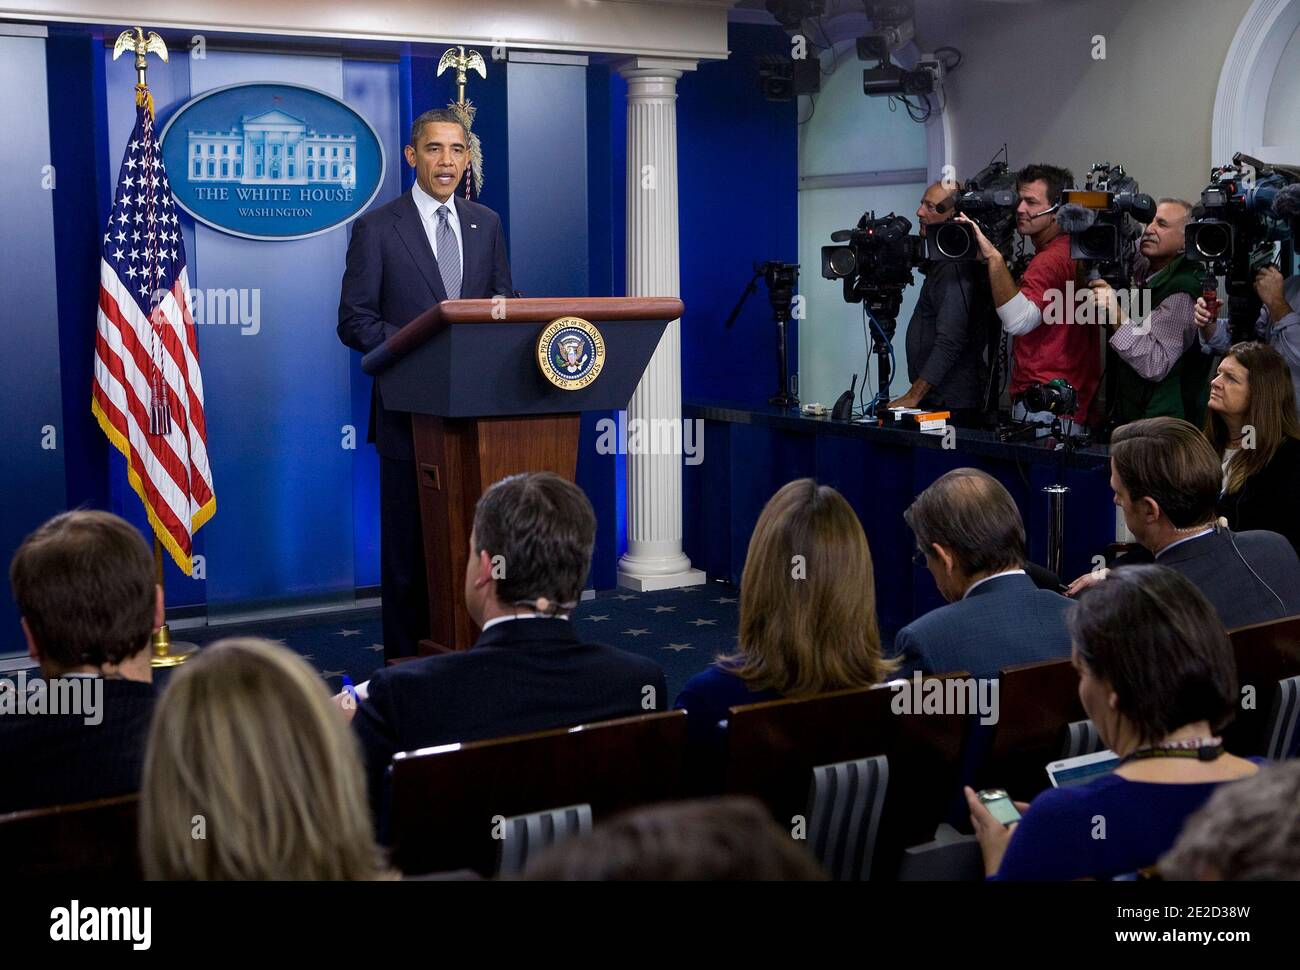 President Barack Obama visits the White House Press Briefing Room to announce the official end of the Iraq War in Washington on October 21, 2011. The President said that all American forces will return to the United States by the end of the year and the US will begin normalized relations with Iraq. Photo by Kristoffer Tripplaar/ABACAPRESS.COM. Stock Photo